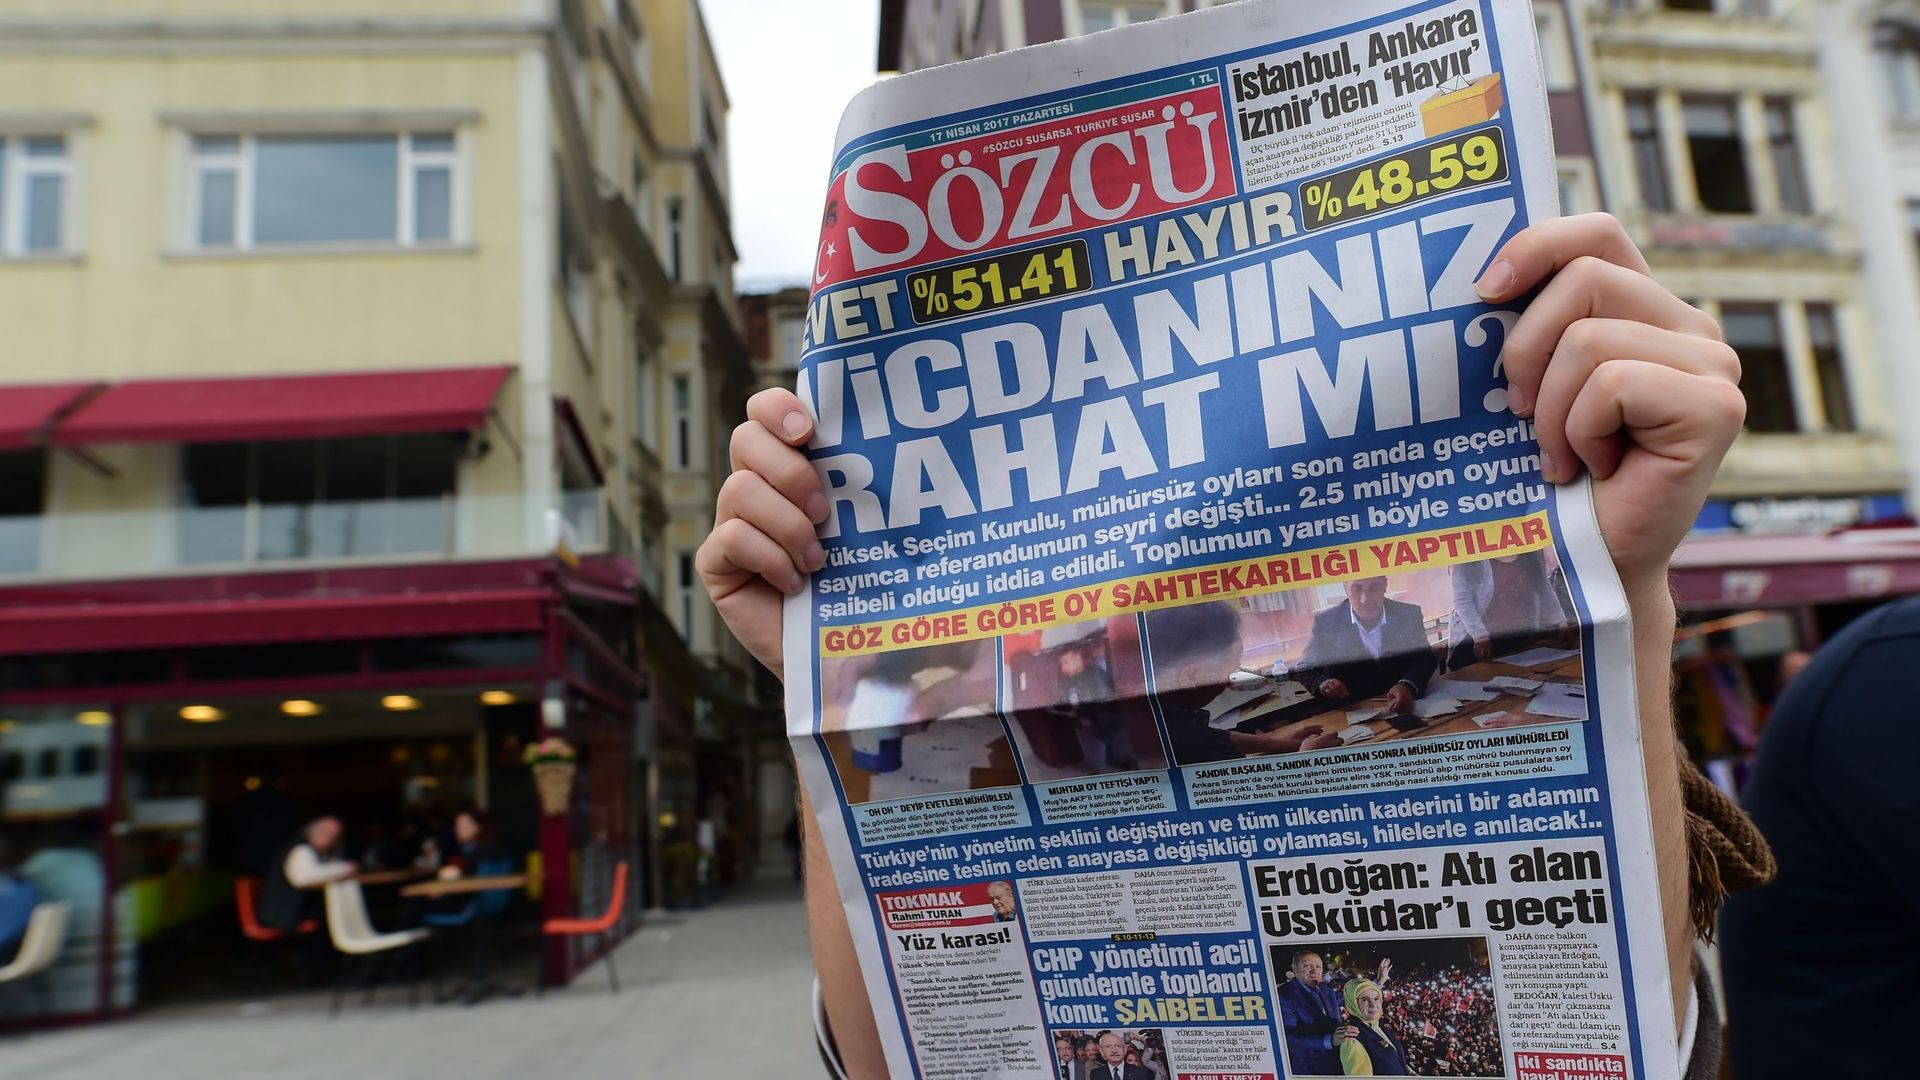 Le journal d'opposition Sozcu